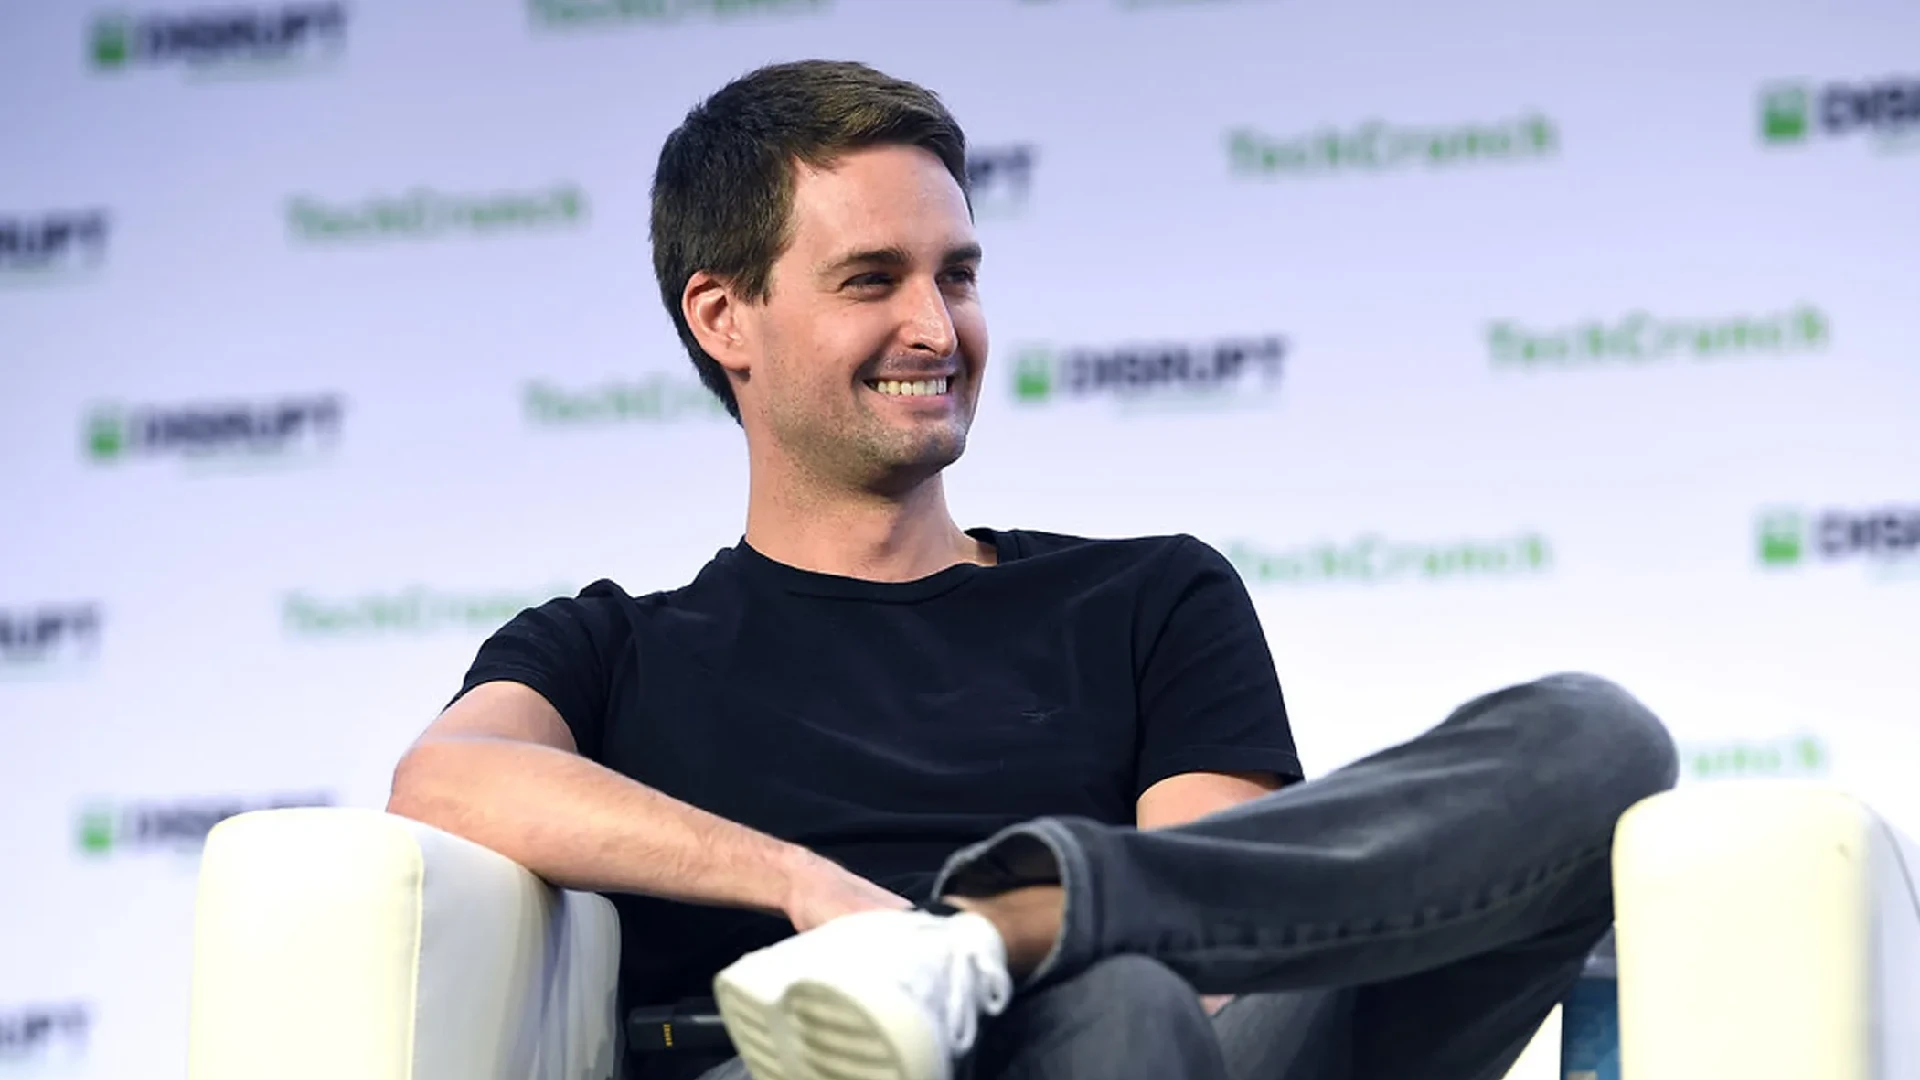 Snapchat CEO Evan Spiegel Believes People Should Love The Real World, Rejects The Metaverse Hype